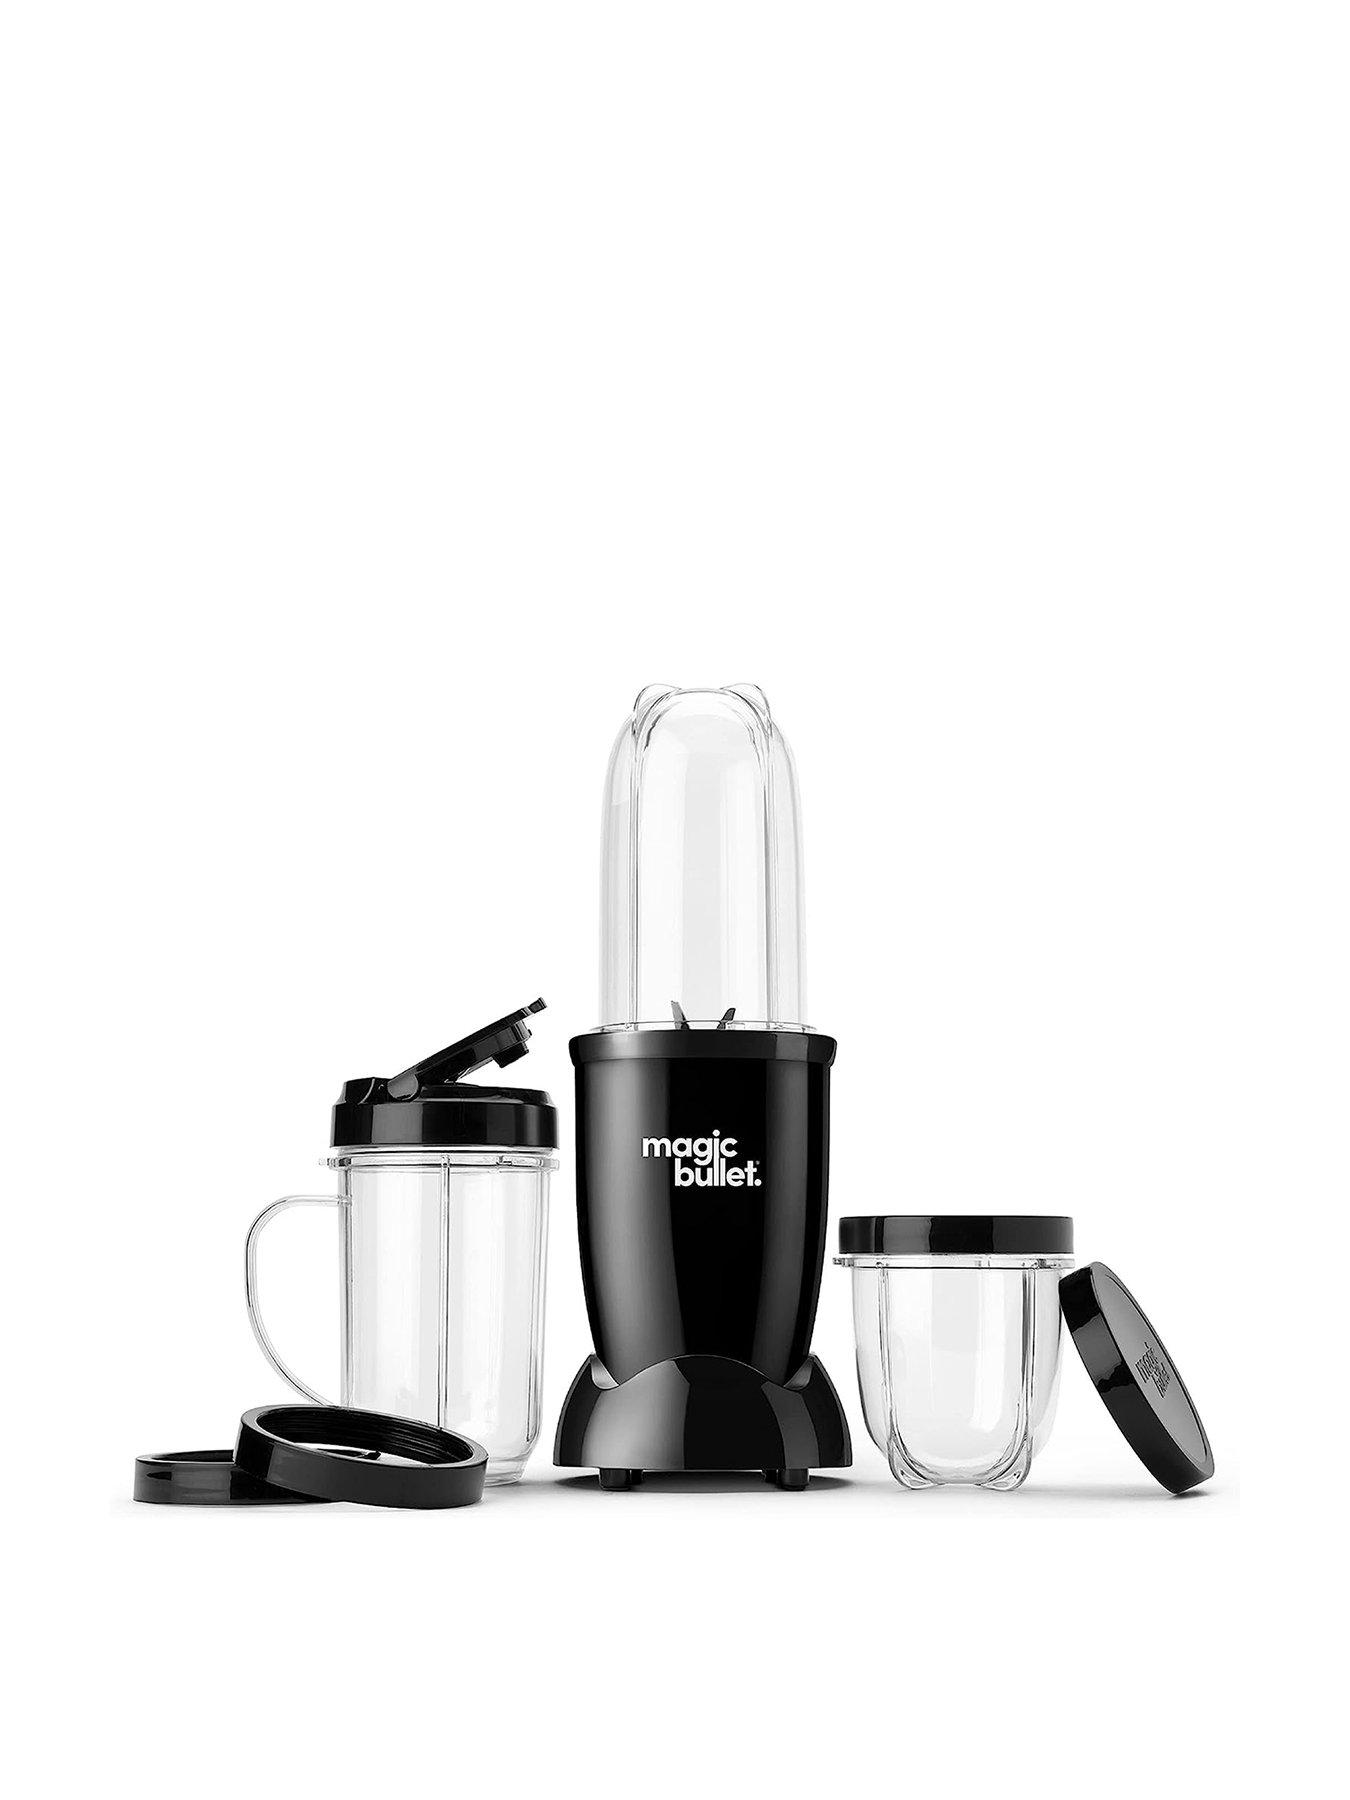 Dash Quest Countertop Blender 1.5L with Stainless Steel Blades for Coffee Drinks